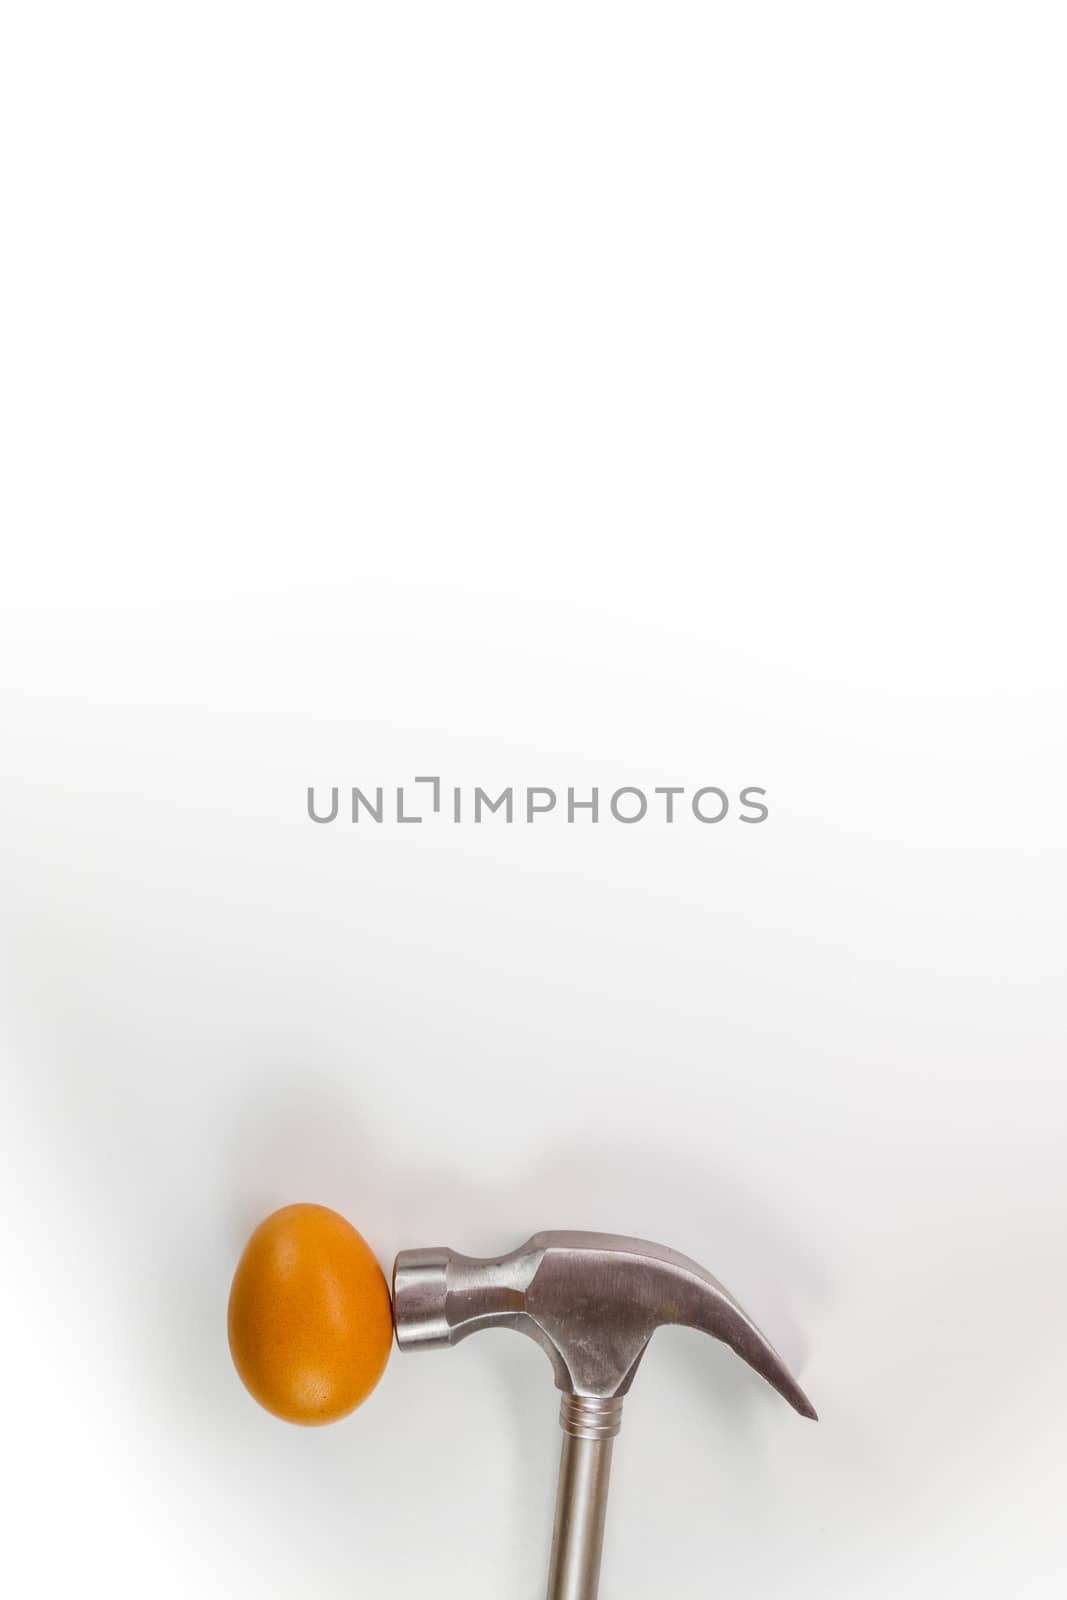 Hammer hitting a egg isolated on white with copy space.